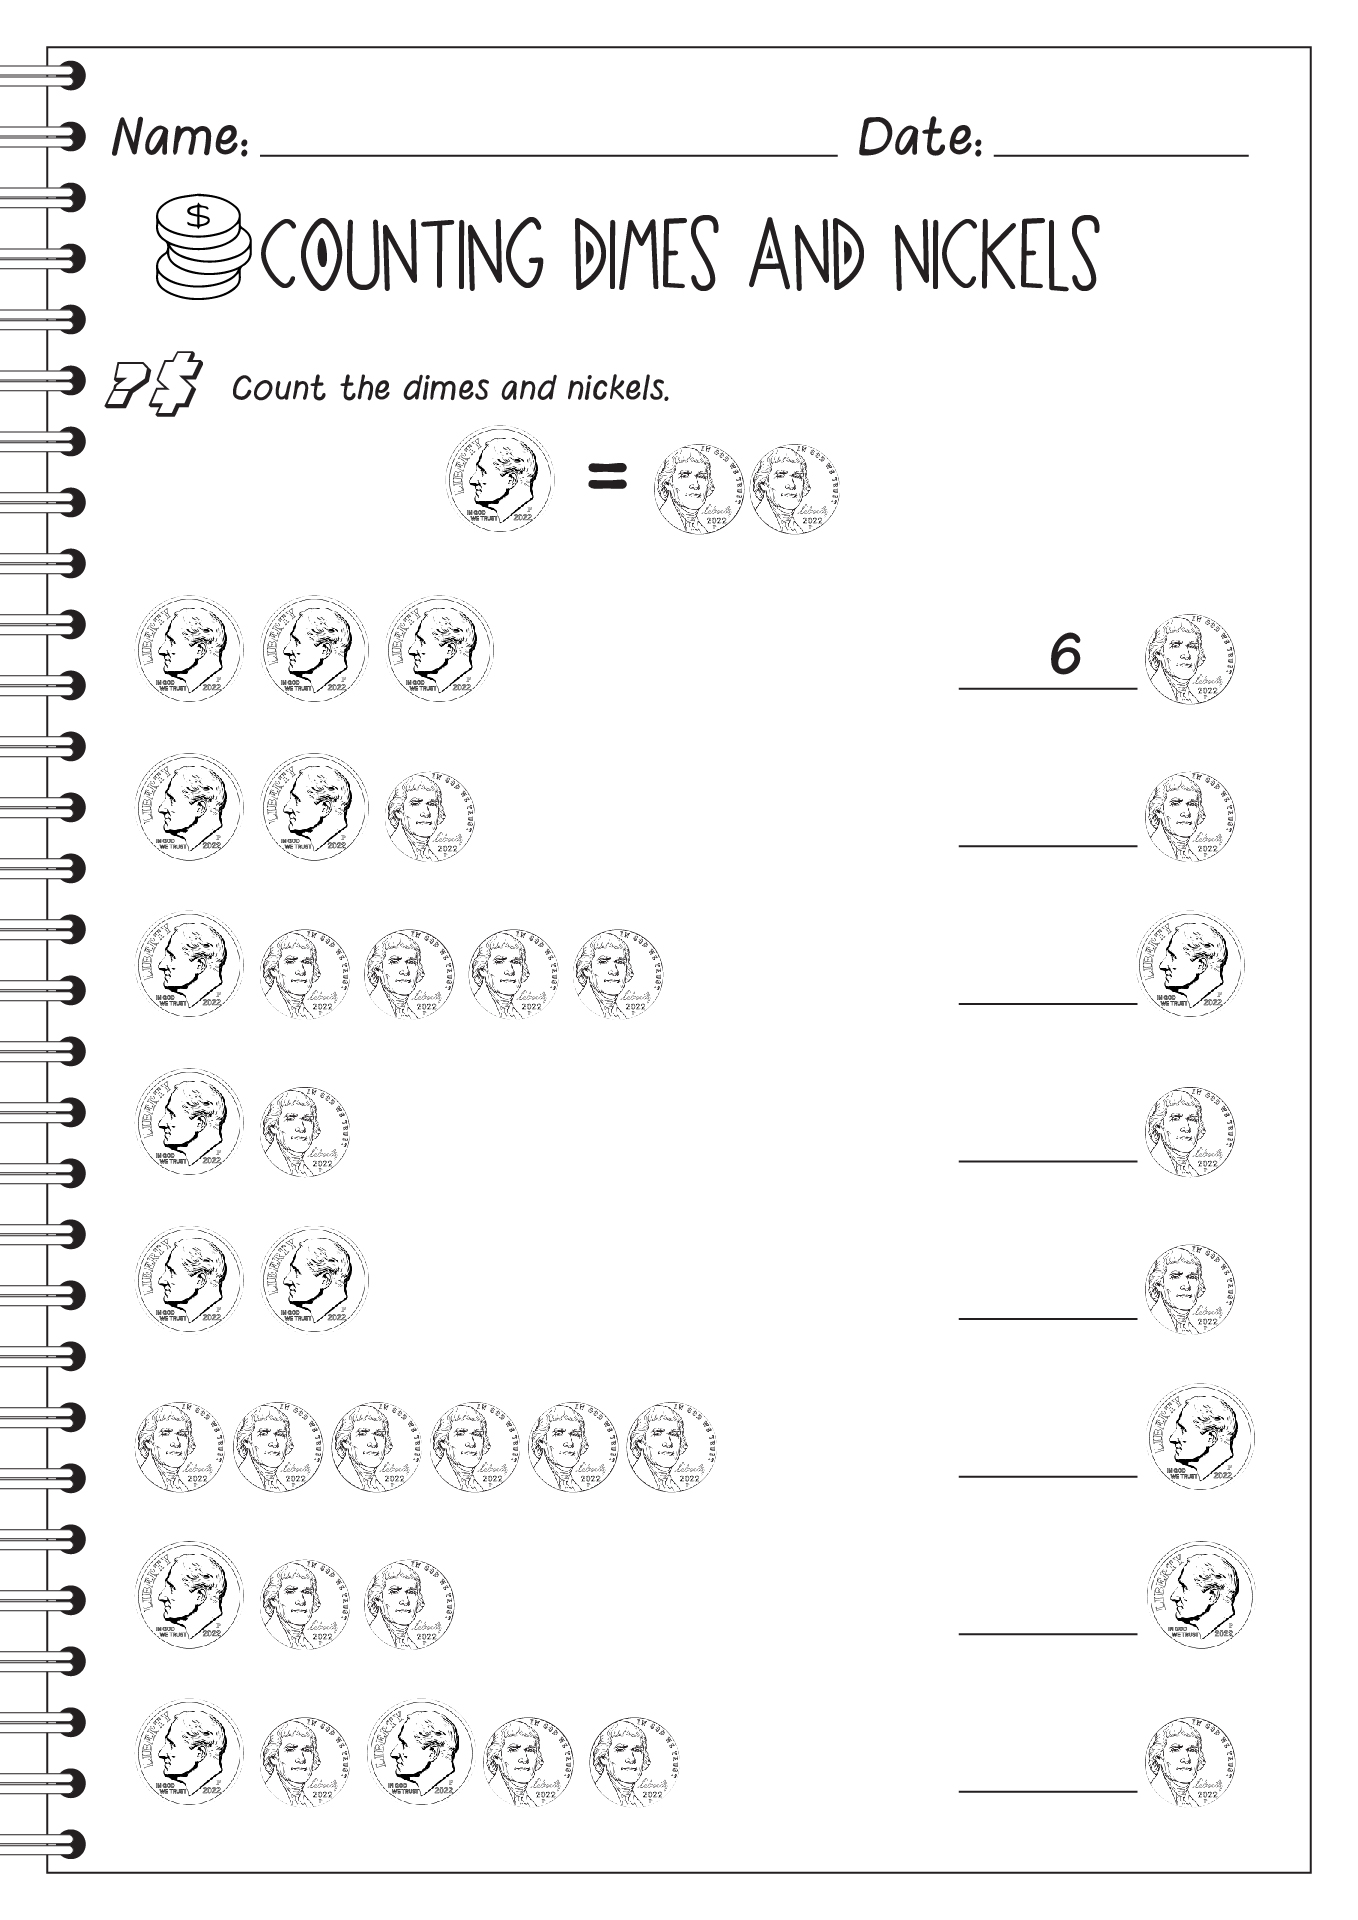 Counting Dimes and Nickels Worksheet